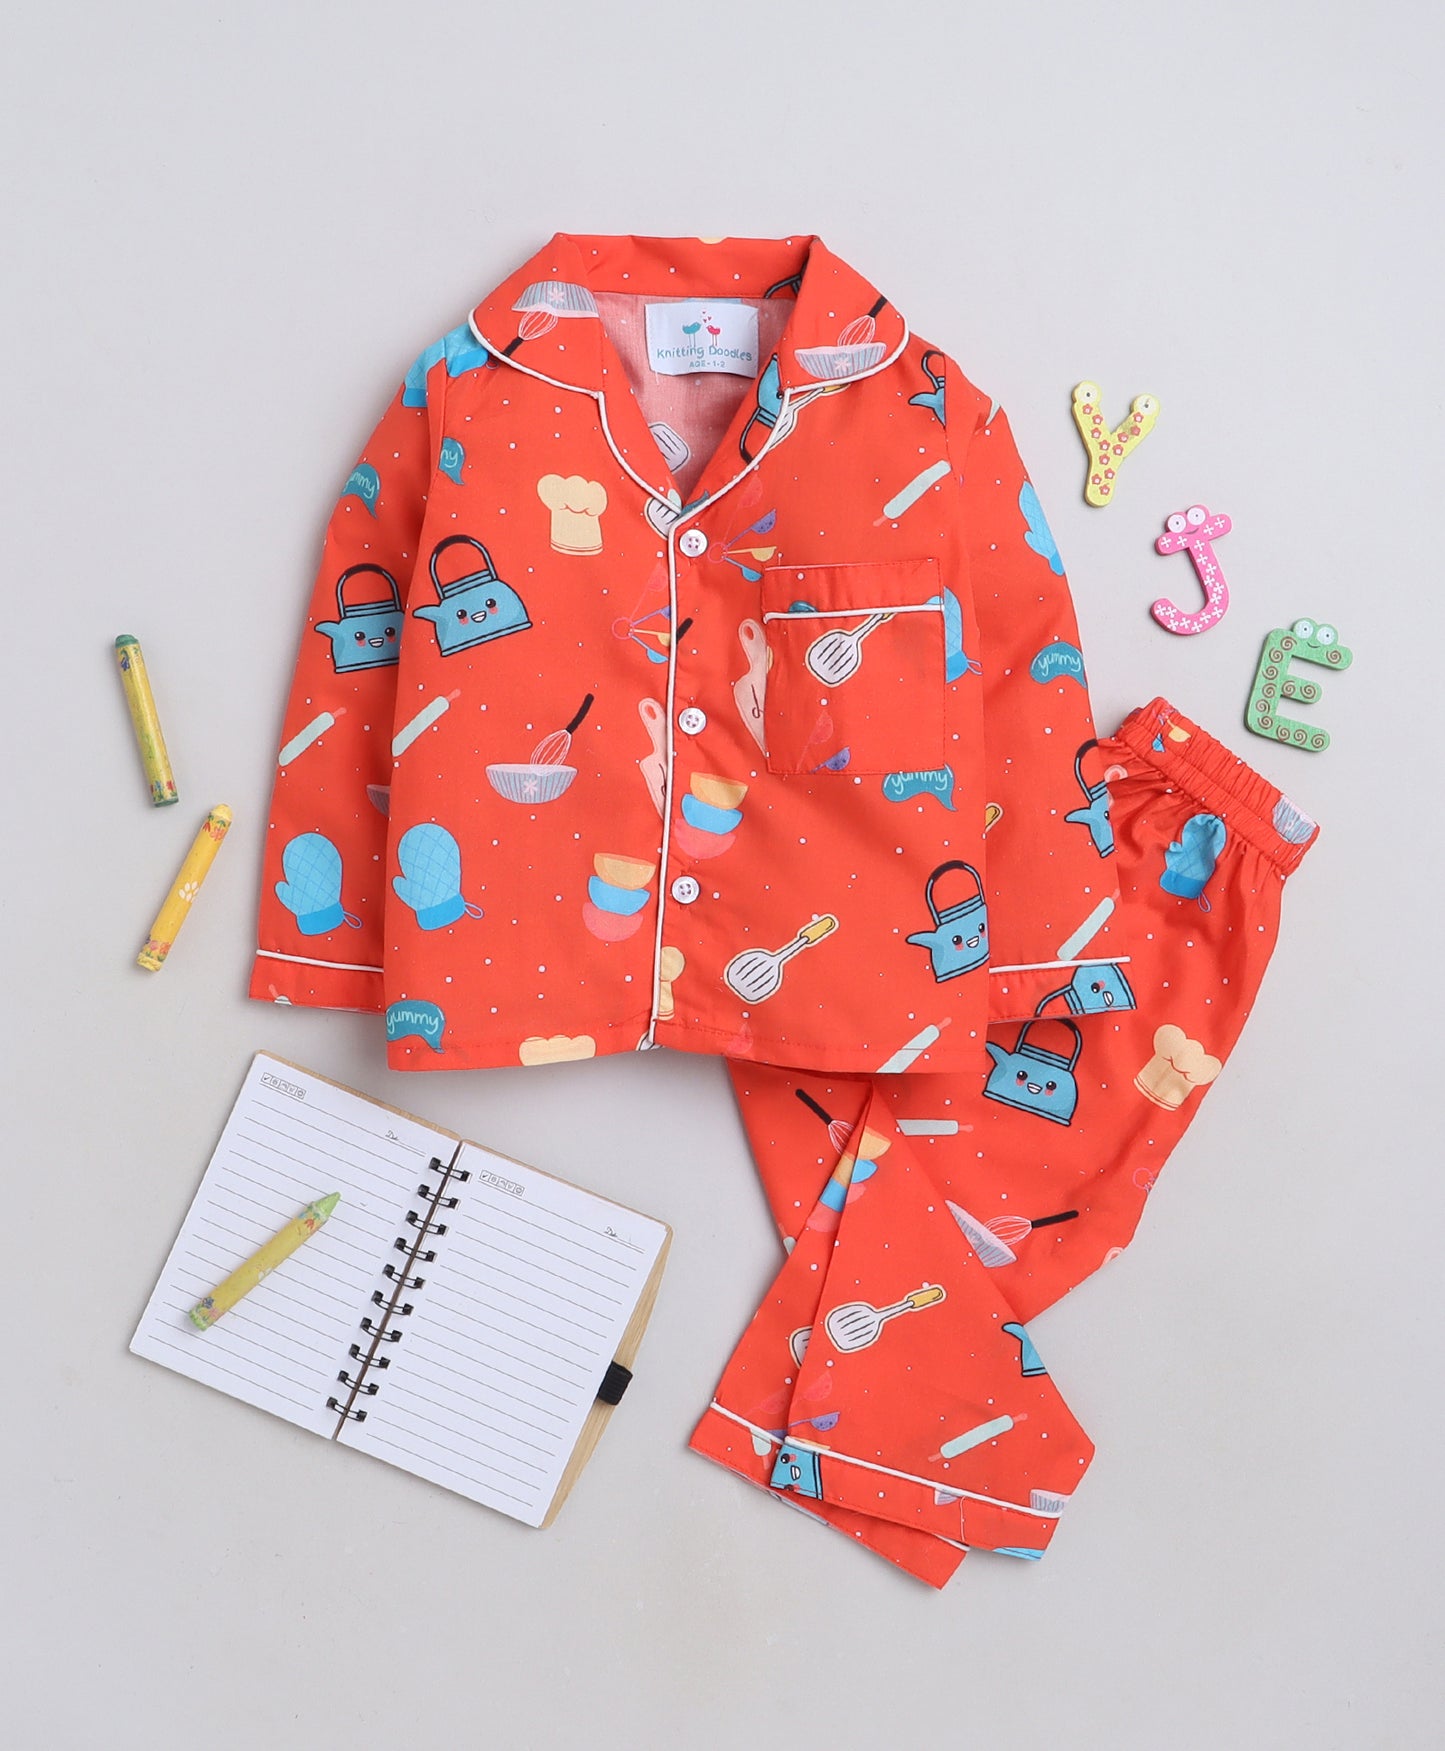 Knitting Doodles Premium cotton Kids' Notched Collar Night suit in cute Baker Print- Red